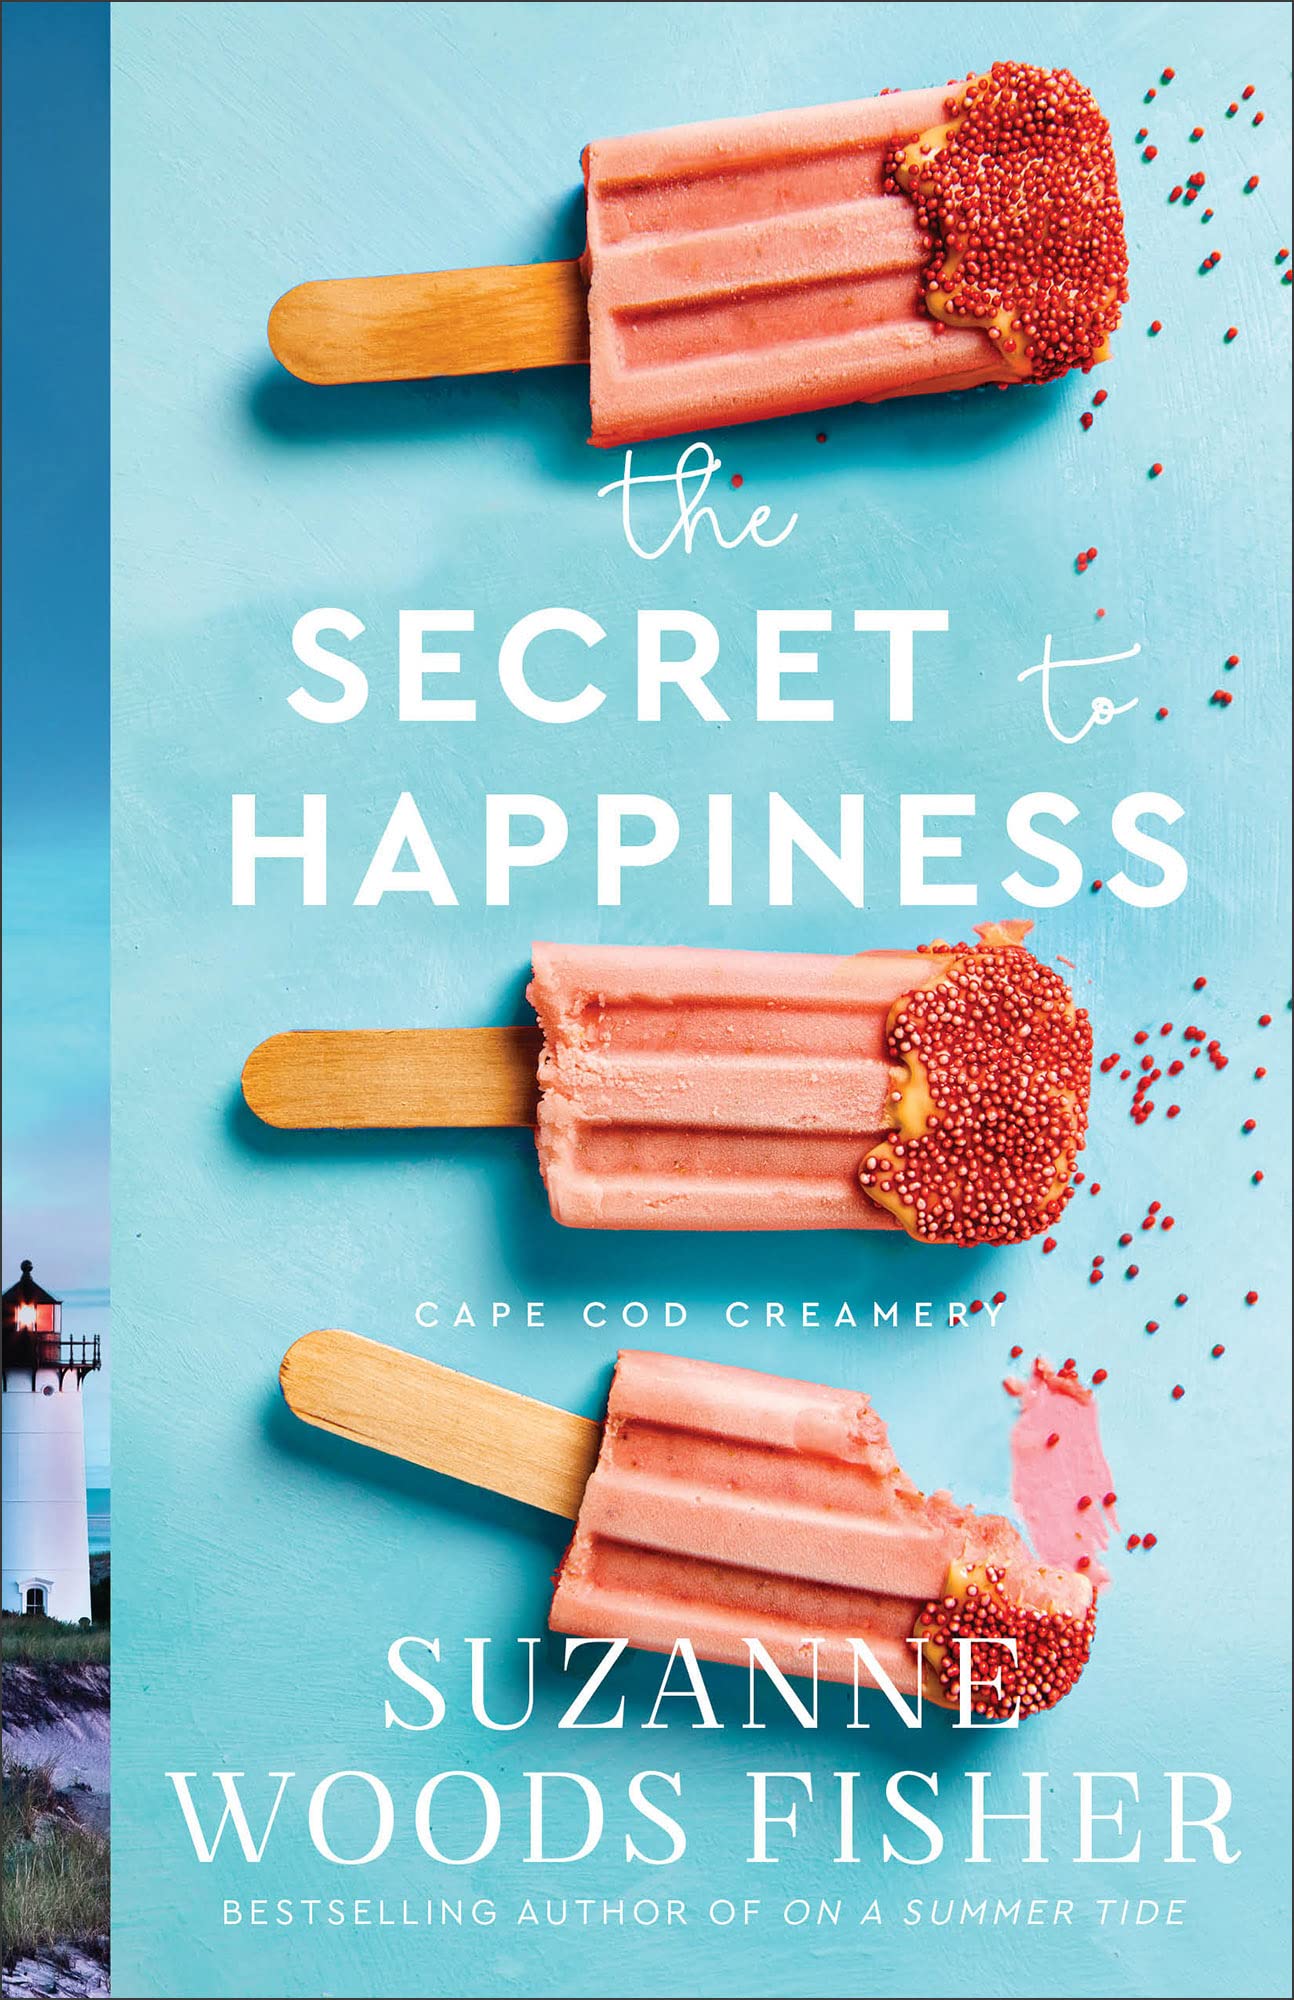 Image of the book, The Secret Happiness